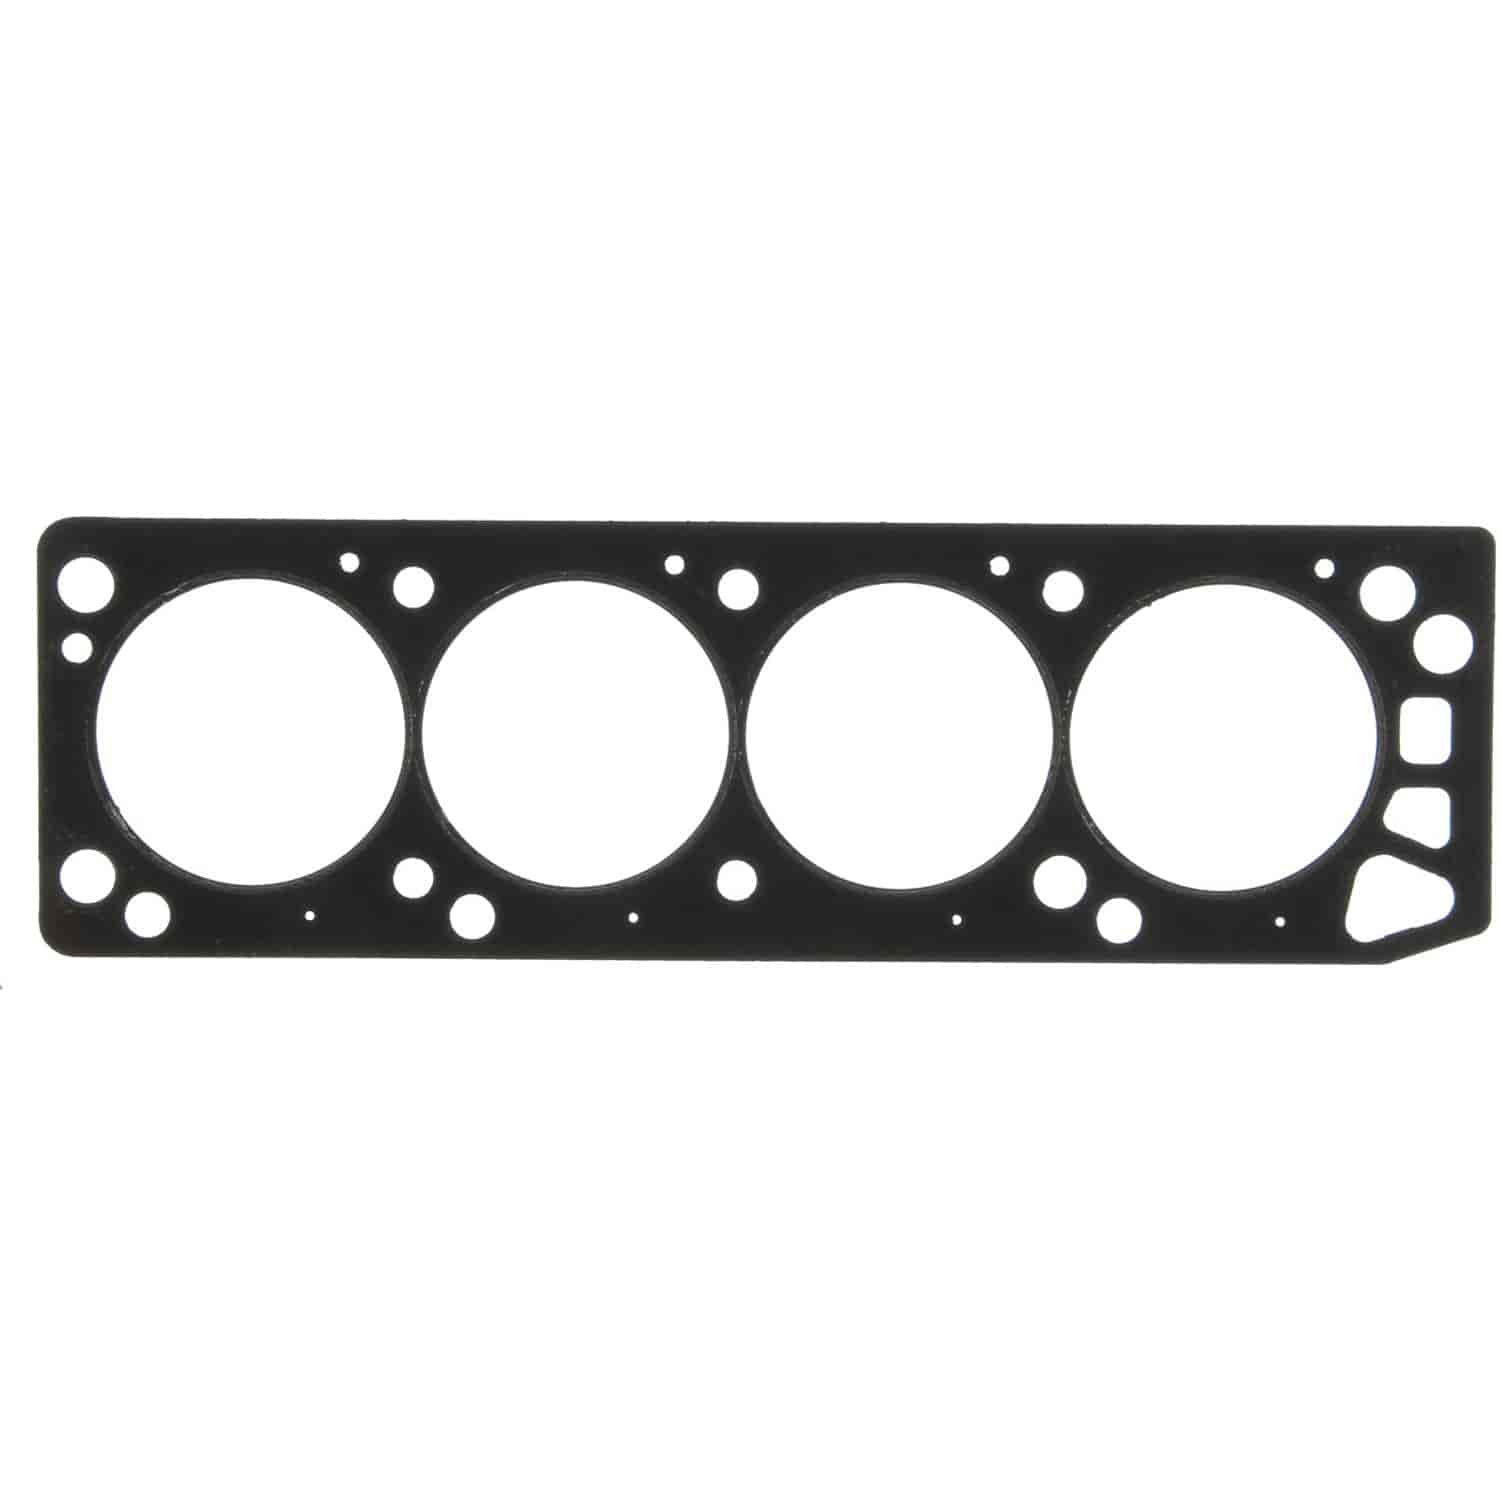 Cylinder Head Gasket Ford-Pass 140 2.3L OHC Eng. 1974-93 Ford-Trk 140 2.3L OHC Eng. 1977-97